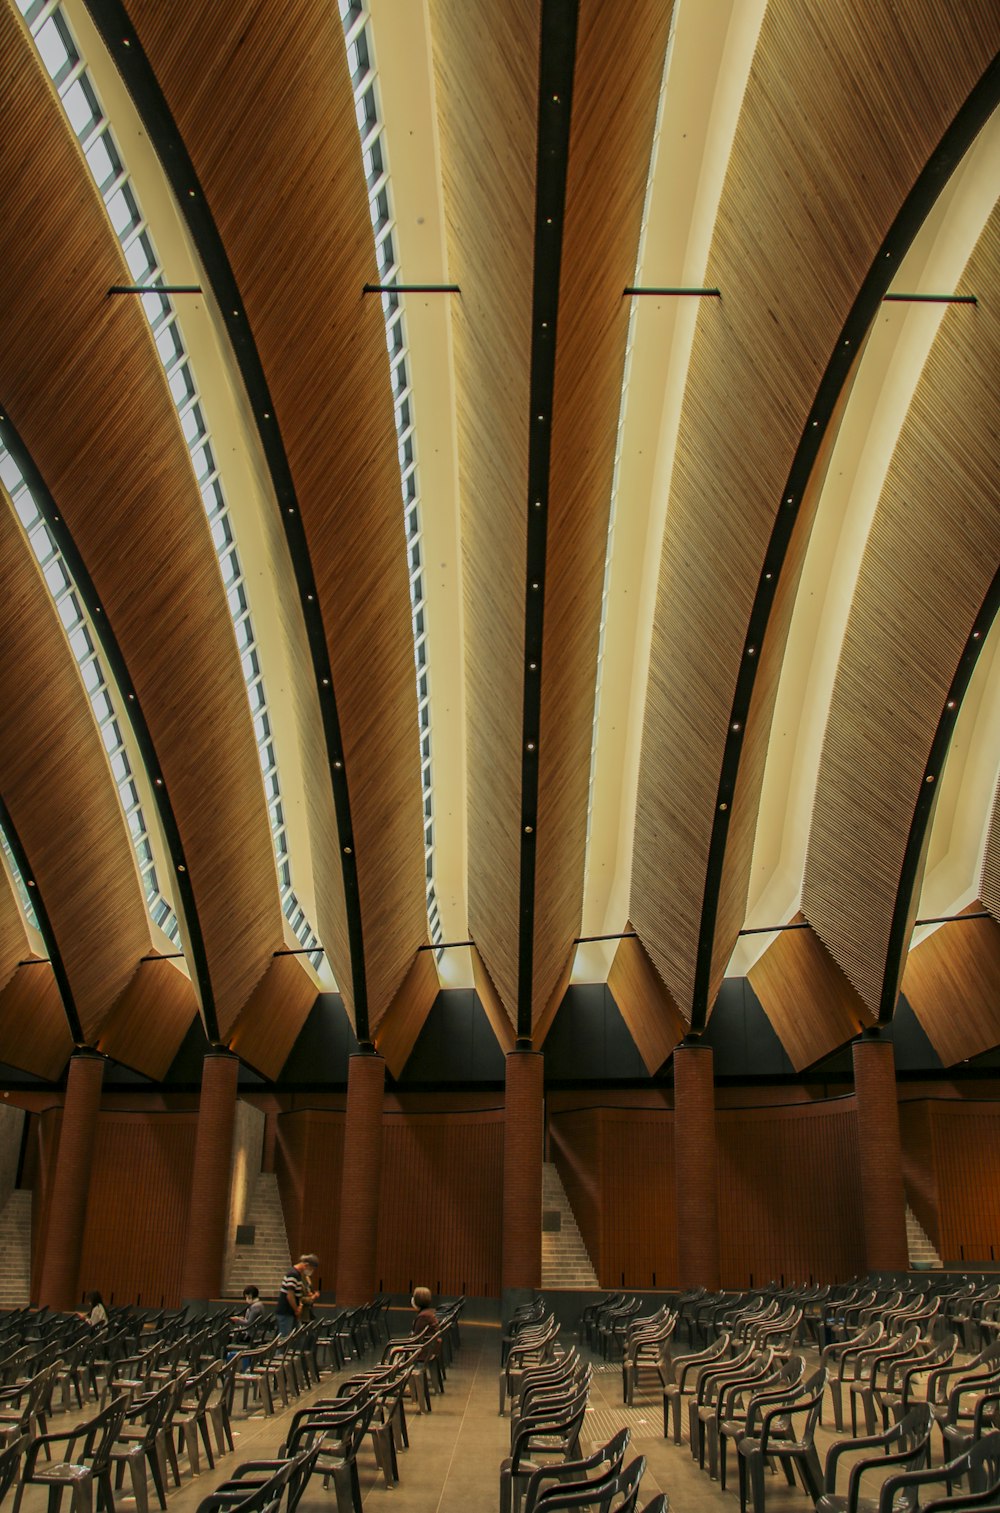 the ceiling of a large auditorium with rows of chairs